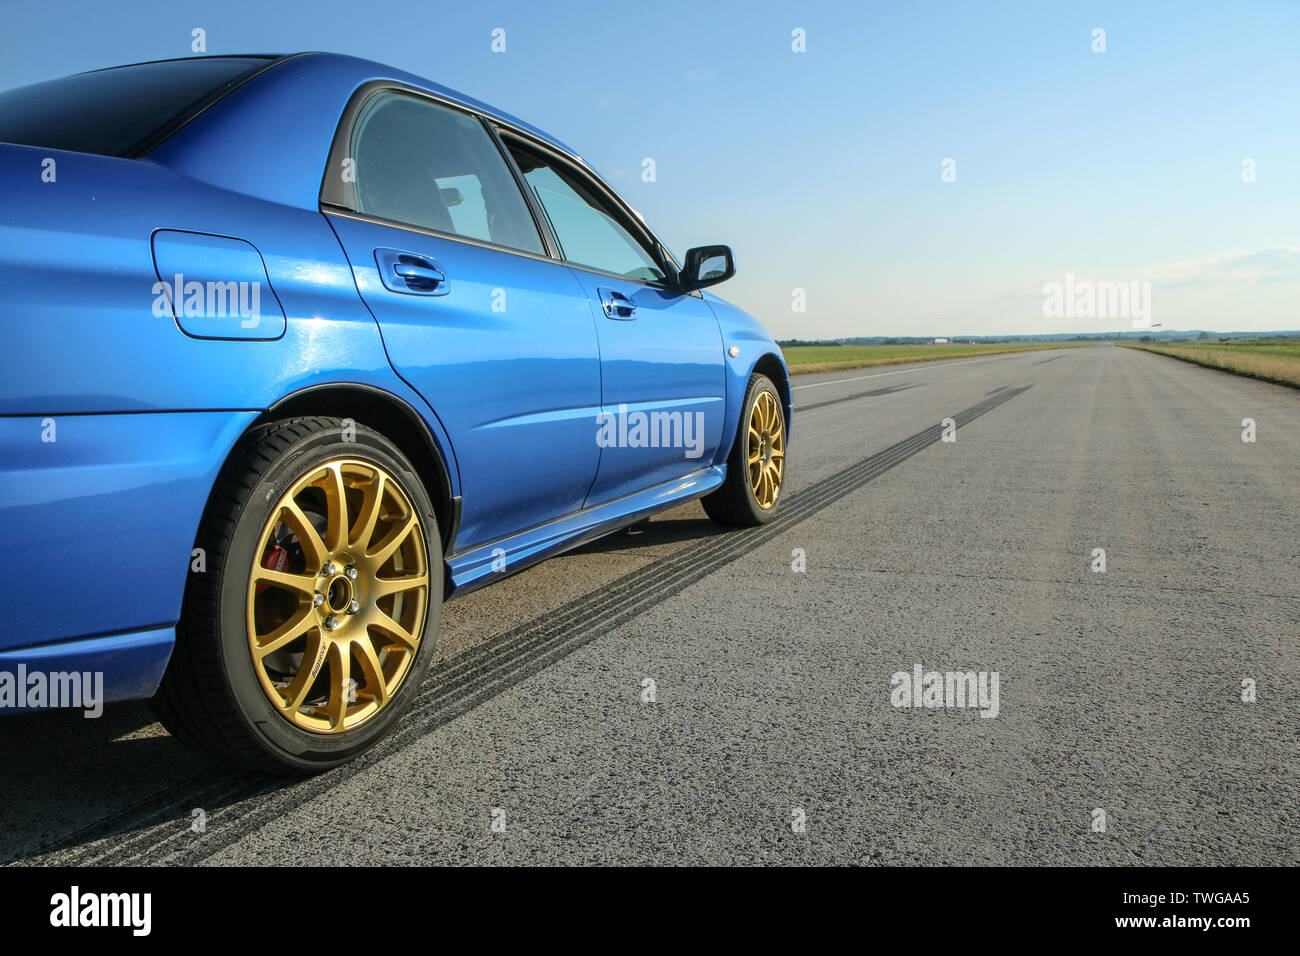 The blue youngtimer sports car with golden rims is standing on the concrete runway of the airport and is ready to drive fast. Stock Photo